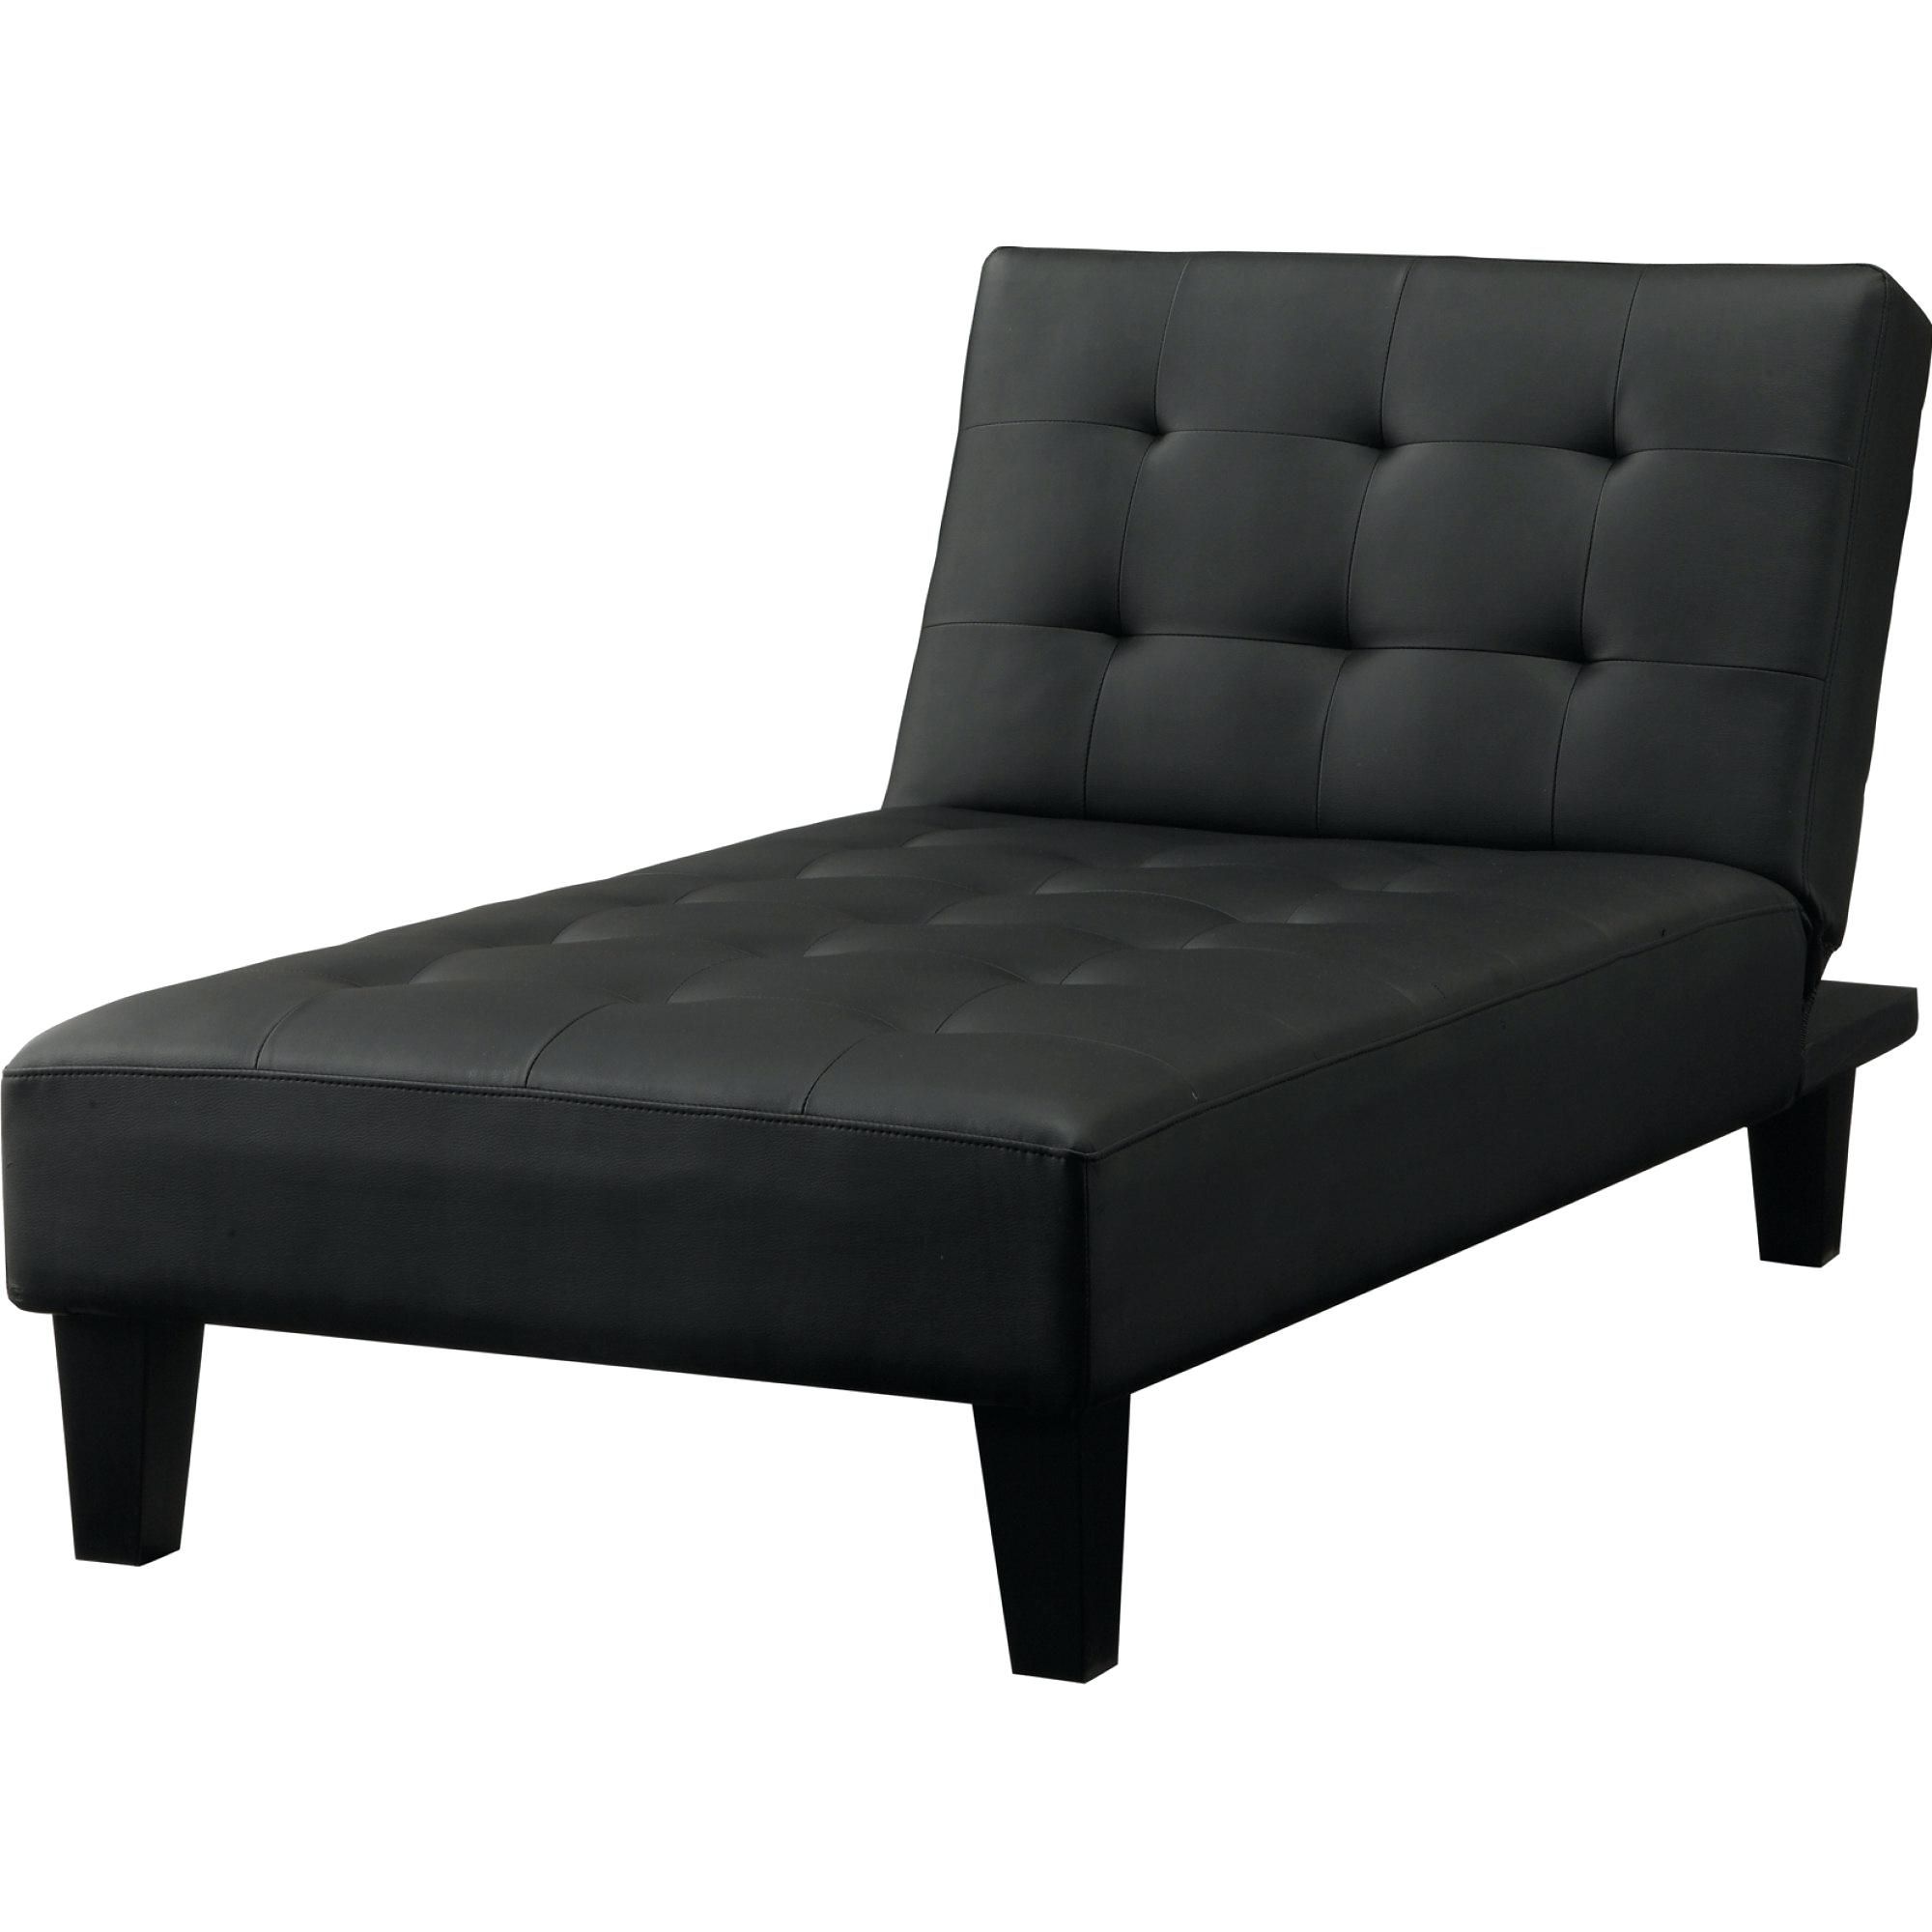 Black Chaise Iron Lounge Chairs Sofa Outdoor – Nikeaf1 Intended For Most Recently Released Damask Chaise Lounge Chairs (View 12 of 15)